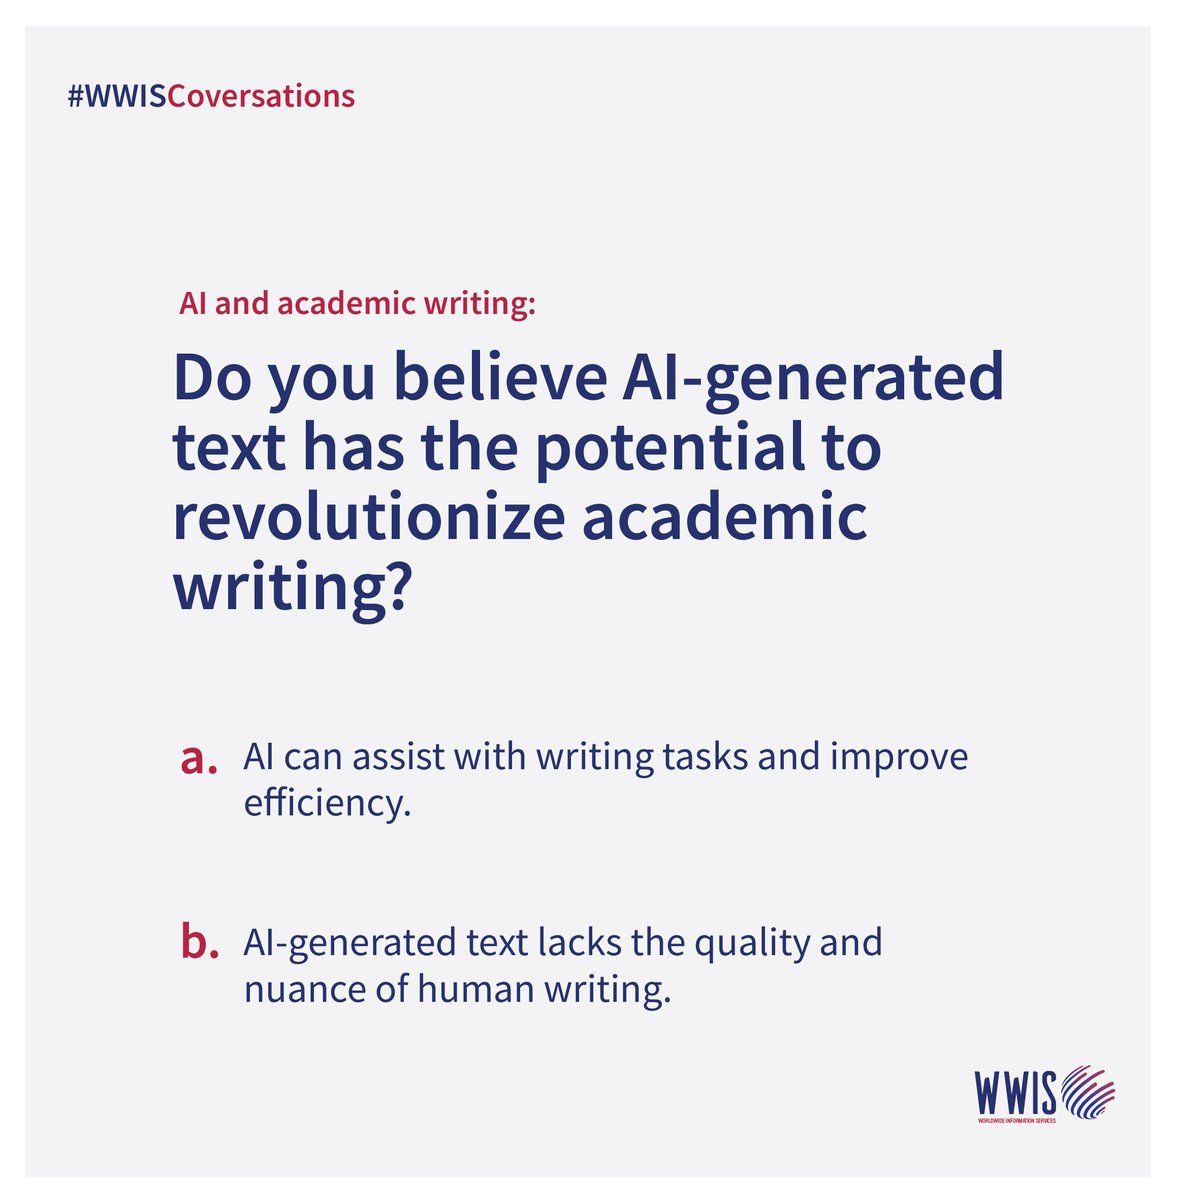 🤔 Let's talk AI and academic writing! 

Cast your vote in our poll and join the conversation. 
Do you think AI-generated text will revolutionize academic writing? 

Share your thoughts below! 
#AI #AcademicWriting #Poll'